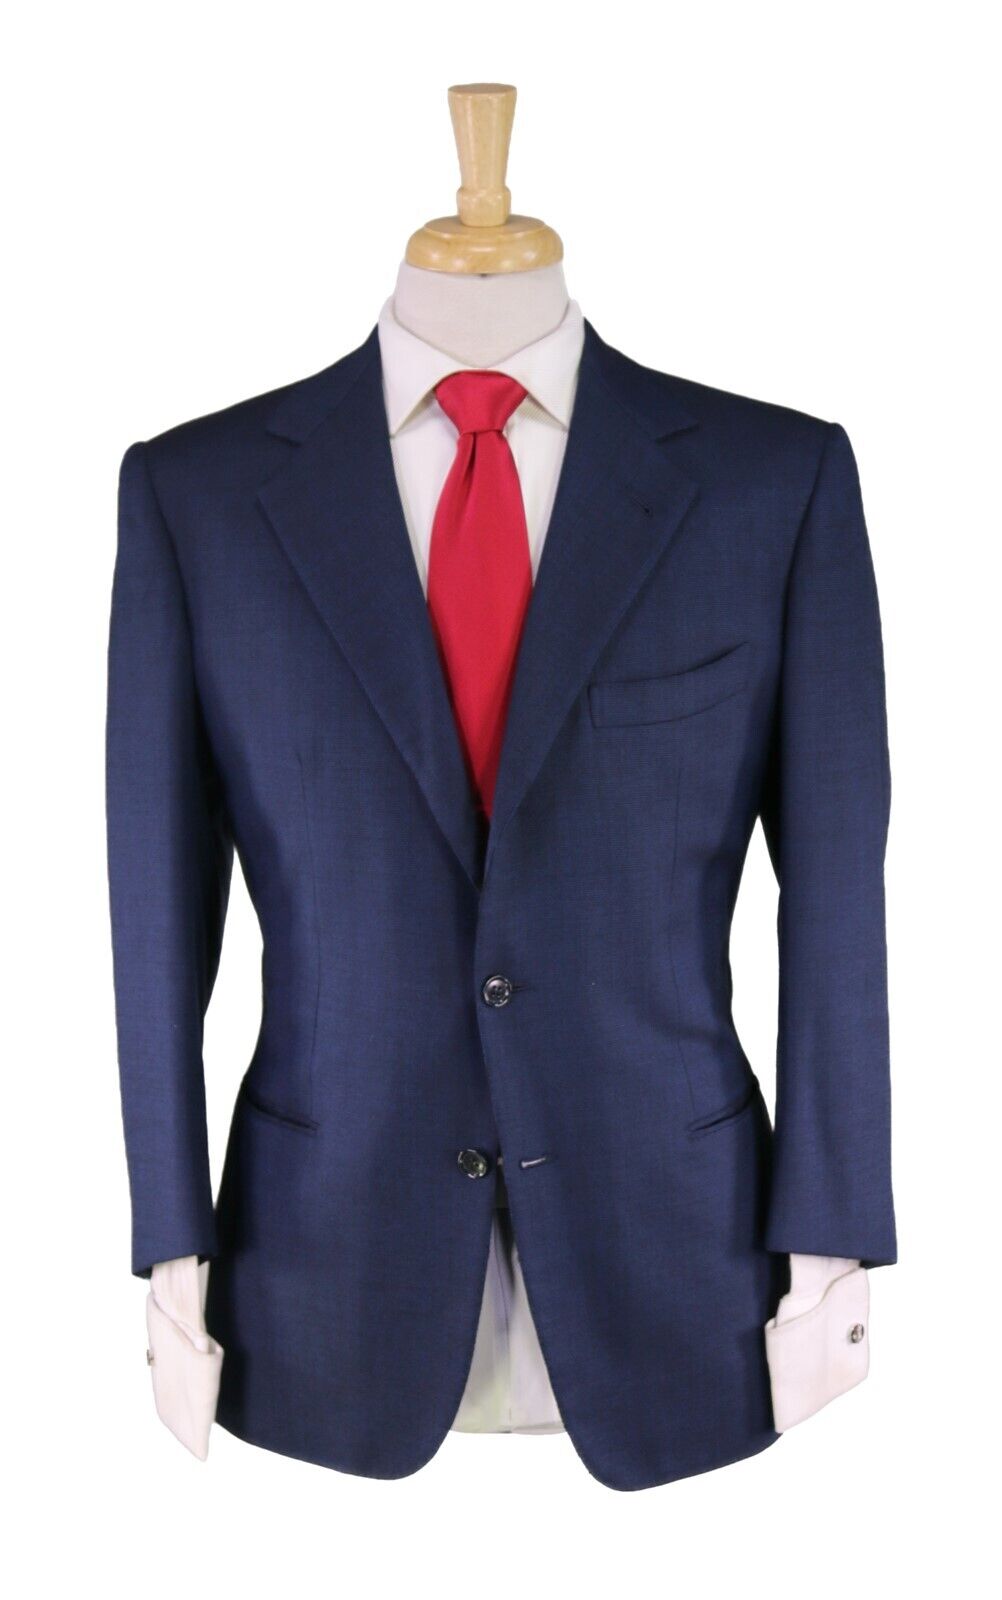 Gianni Campagna Milano Bespoke Blue/Black Tic Woven 2-Btn Handmade Suit 38S